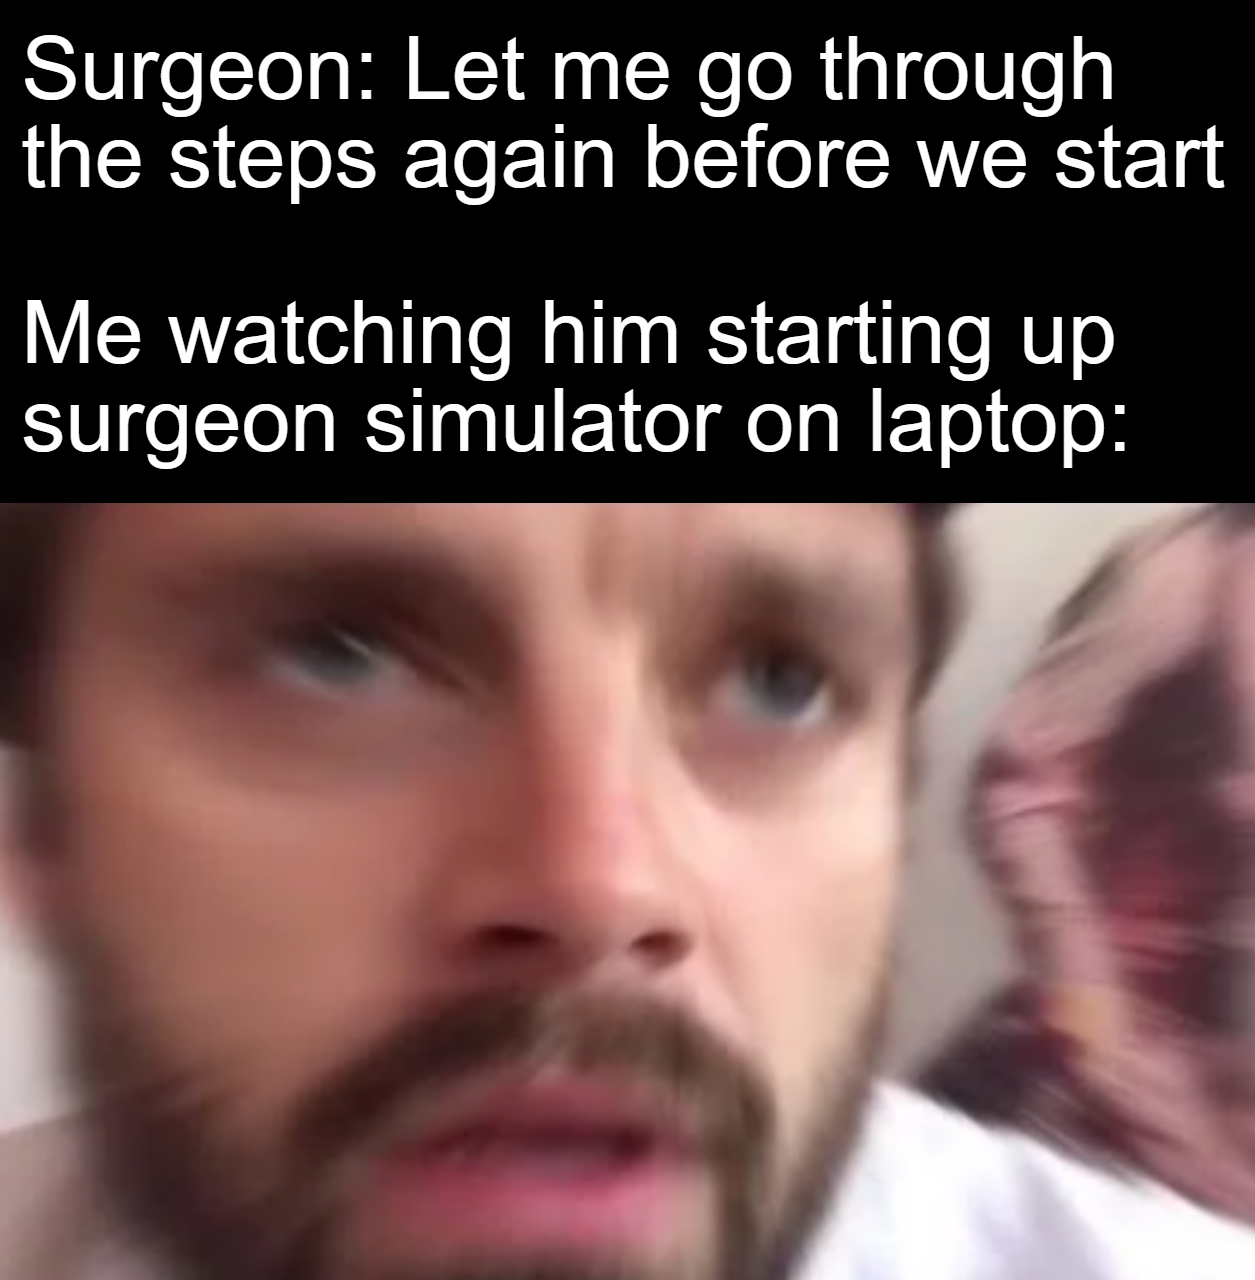 clep - Surgeon Let me go through the steps again before we start Me watching him starting up surgeon simulator on laptop